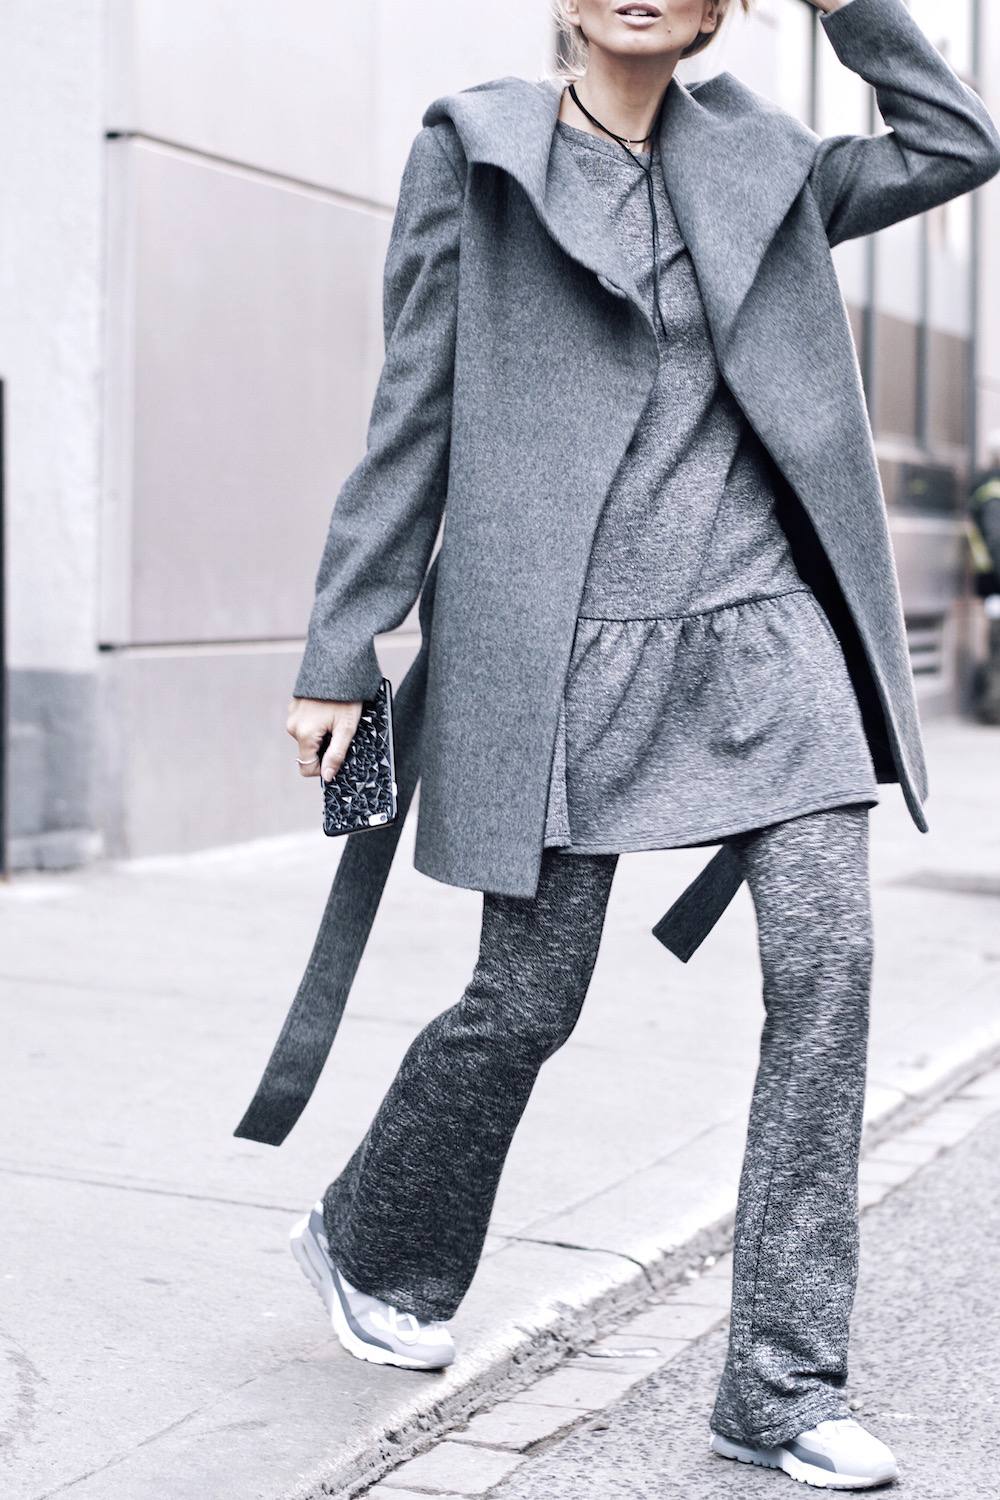 All grey outift monochrome street style 10